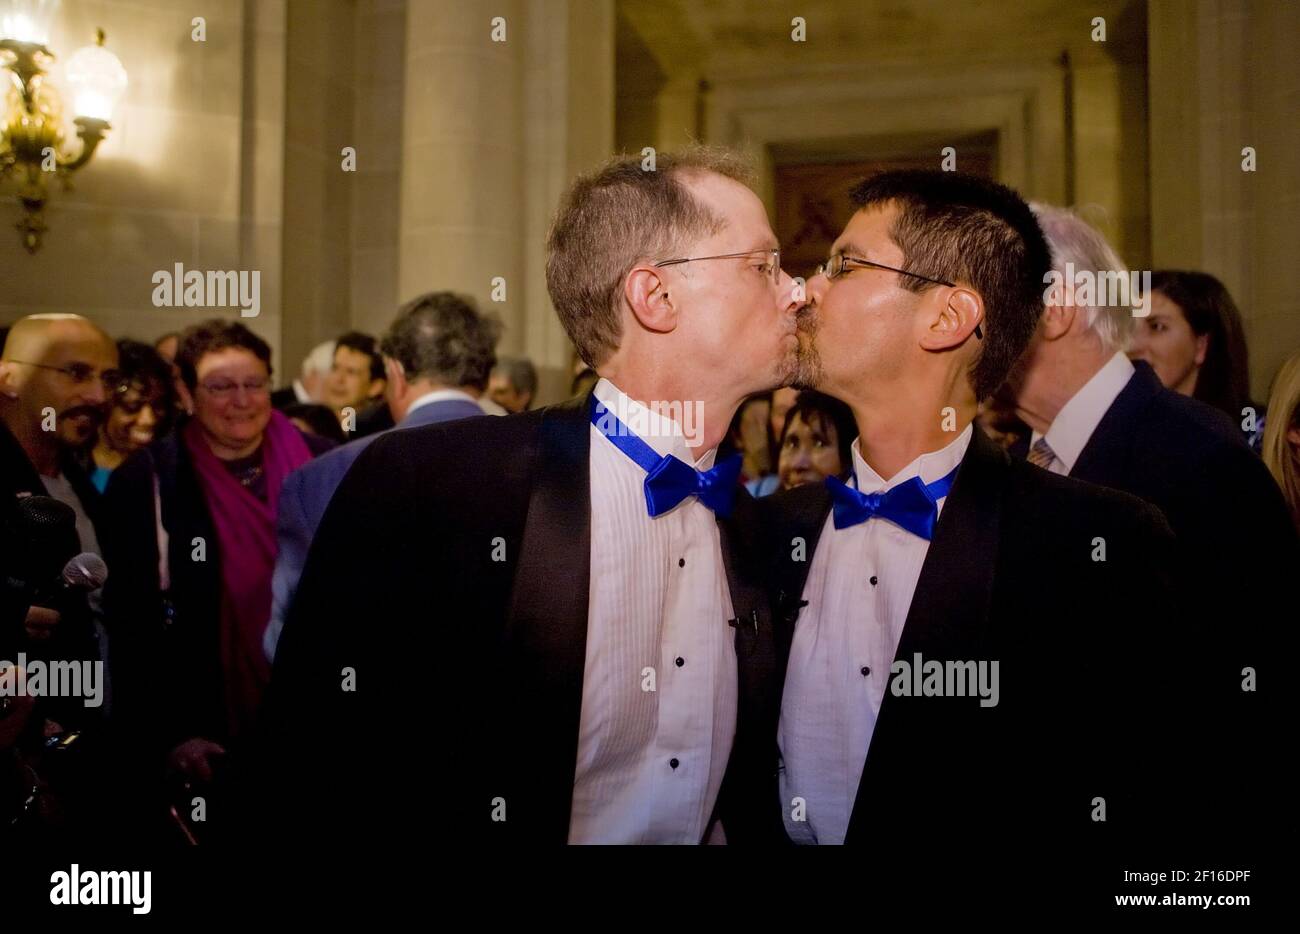 John Lewis, left, and Stuart Gaffney, of San Francisco, kiss after they were married inside the San Francisco City Hall, on the second day of legal gay marriages in California, Tuesday, June 17, 2008. The two were plaintiffs in the lawsuit that overturned the marriage ban. (Photo by Brian Baer/Sacramento Bee/MCT/Sipa USA) Stock Photo